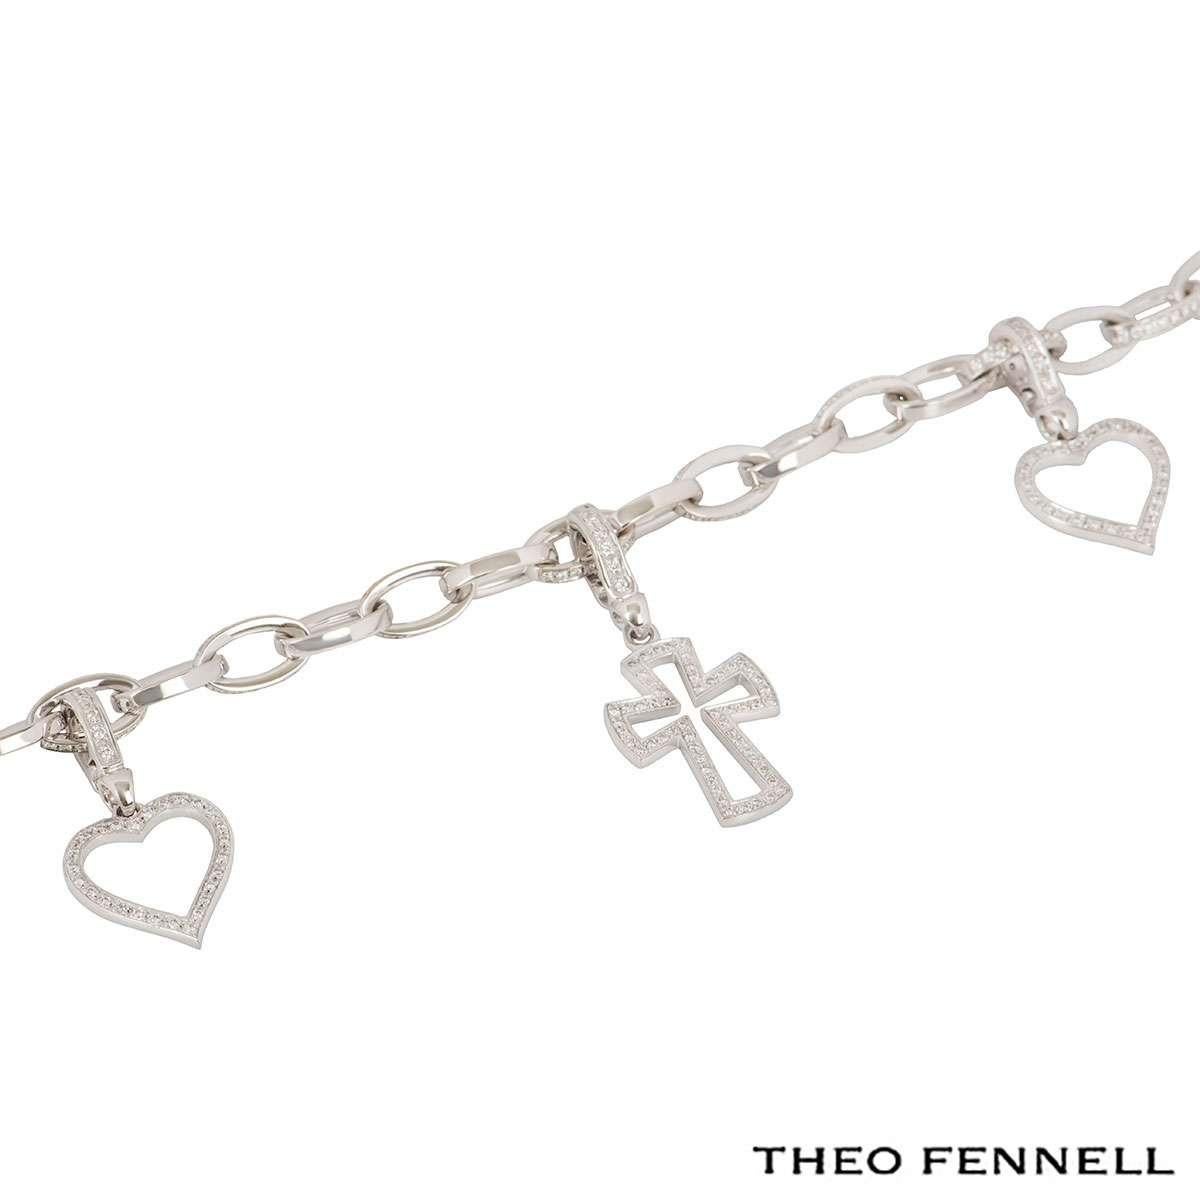 A stunning 18k white gold charm bracelet by Theo Fennell. The bracelet features 11 diamond links with 3 detachable charms including 2 hearts and 1 cross, all pave set with round brilliant cut diamonds. The diamonds have a total weight of